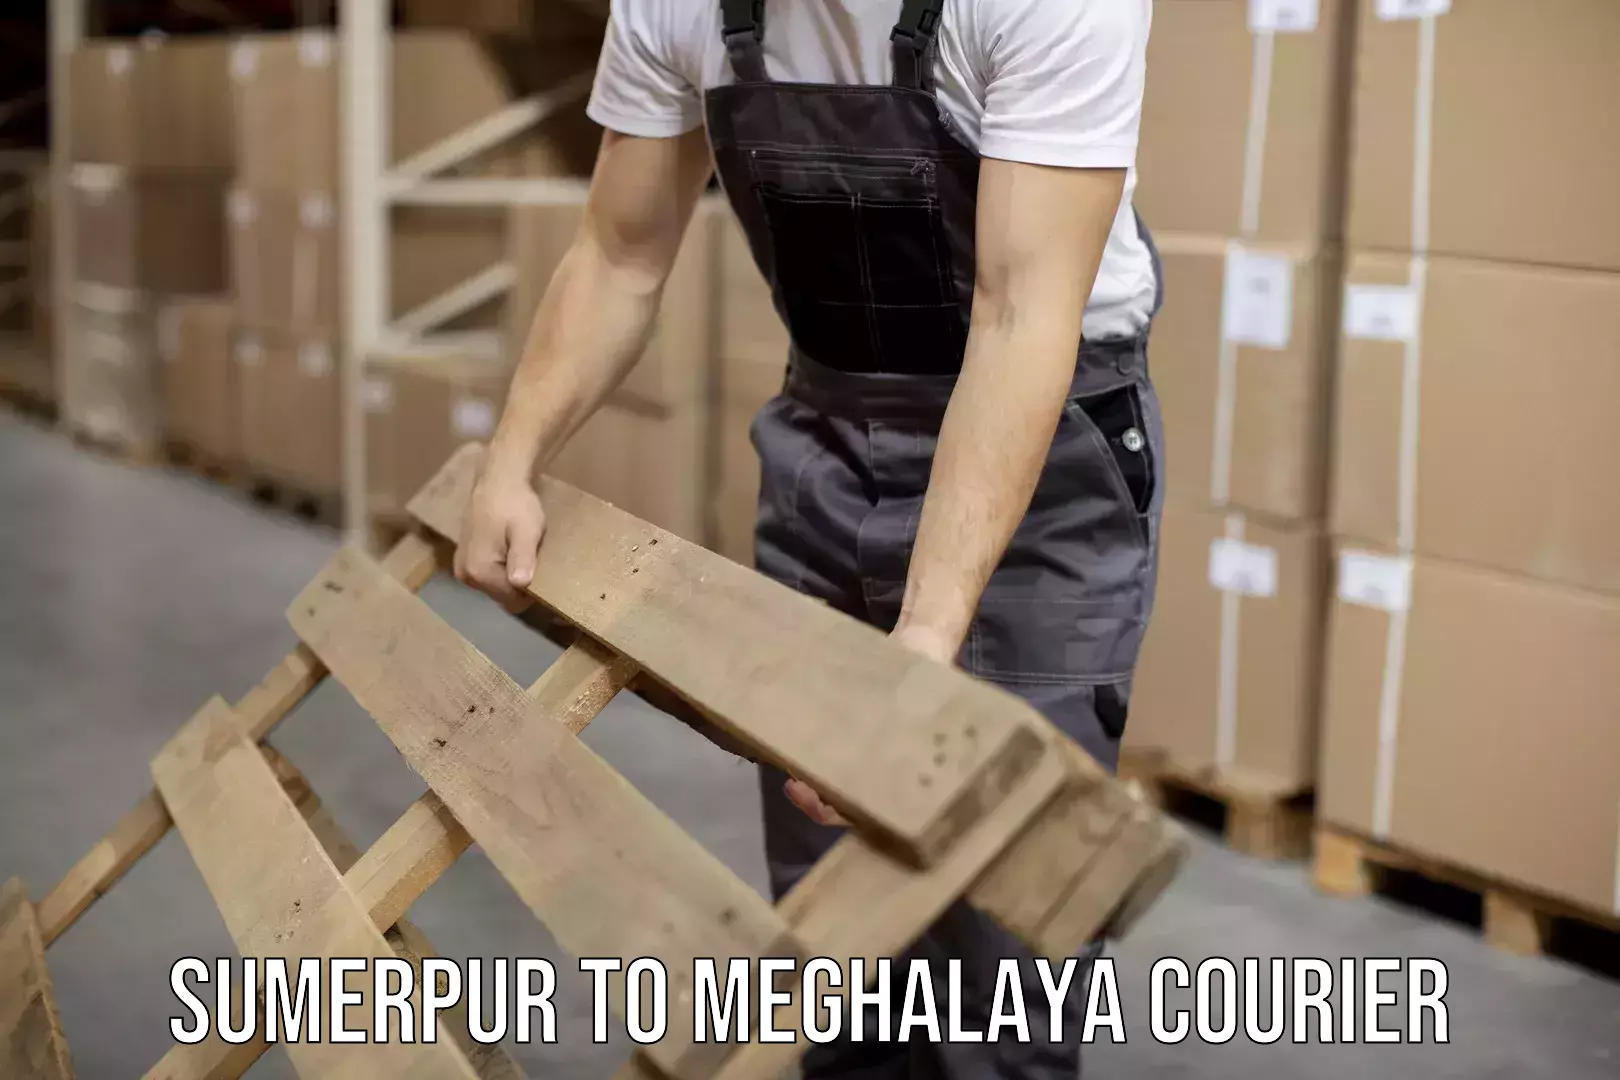 State-of-the-art courier technology Sumerpur to Meghalaya